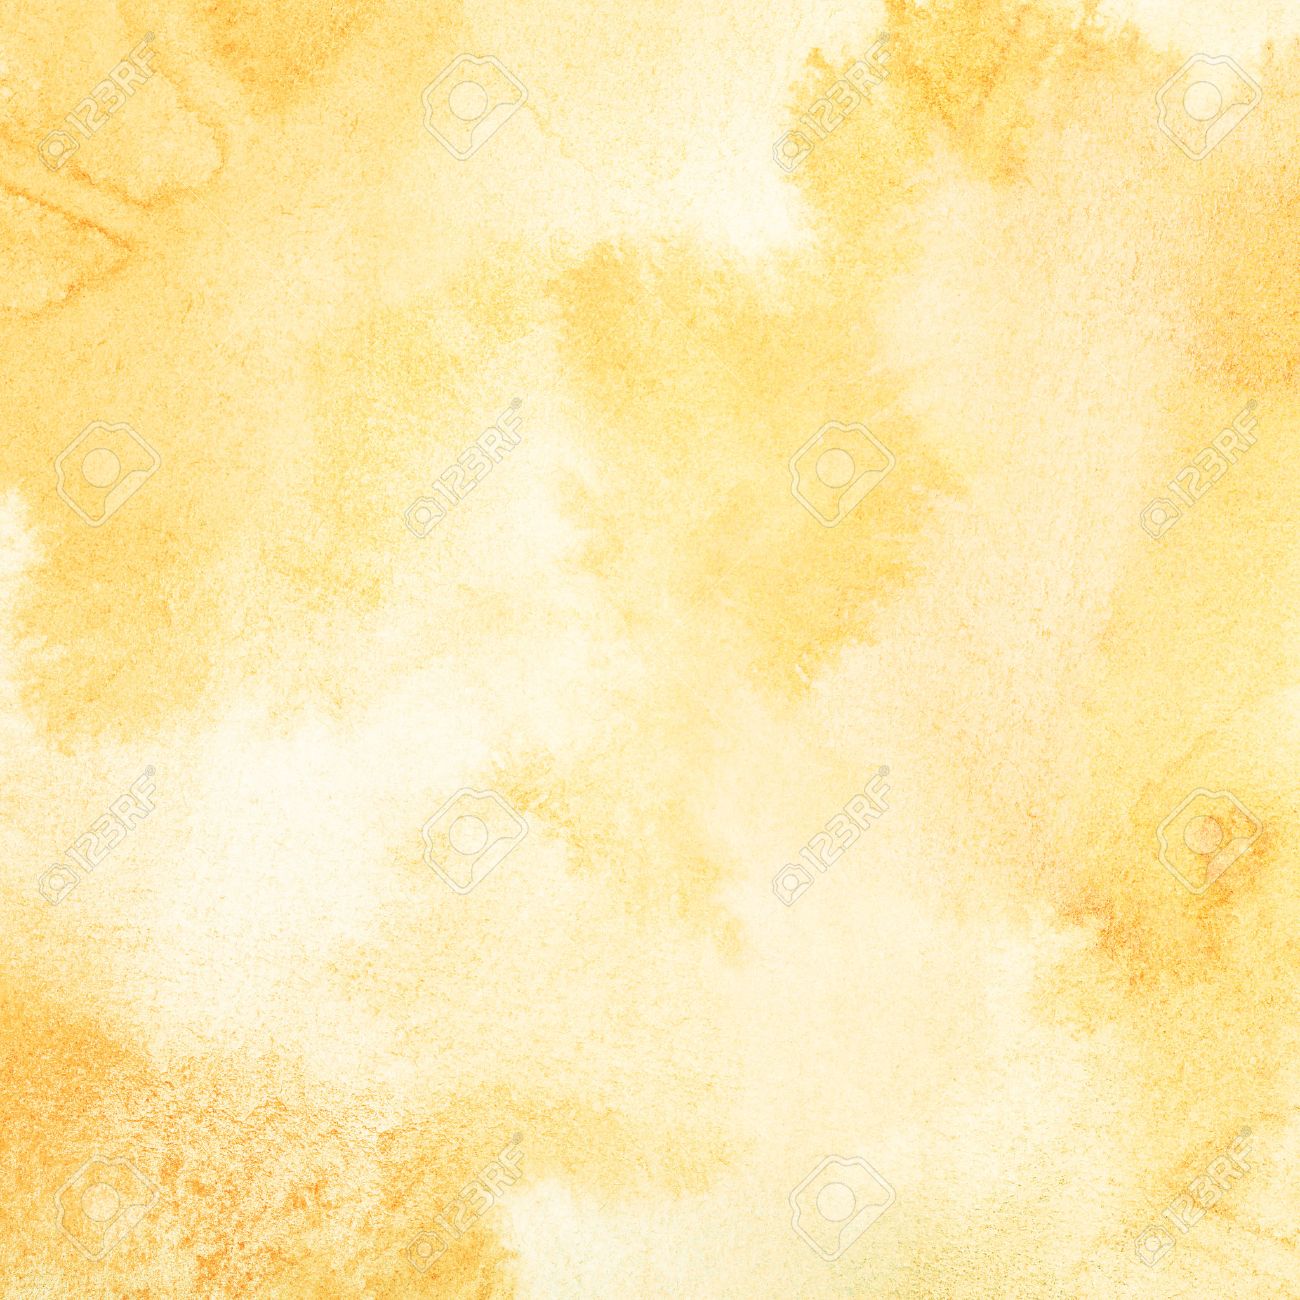 Abstract Light Orange Watercolor Background Stock Photo Picture